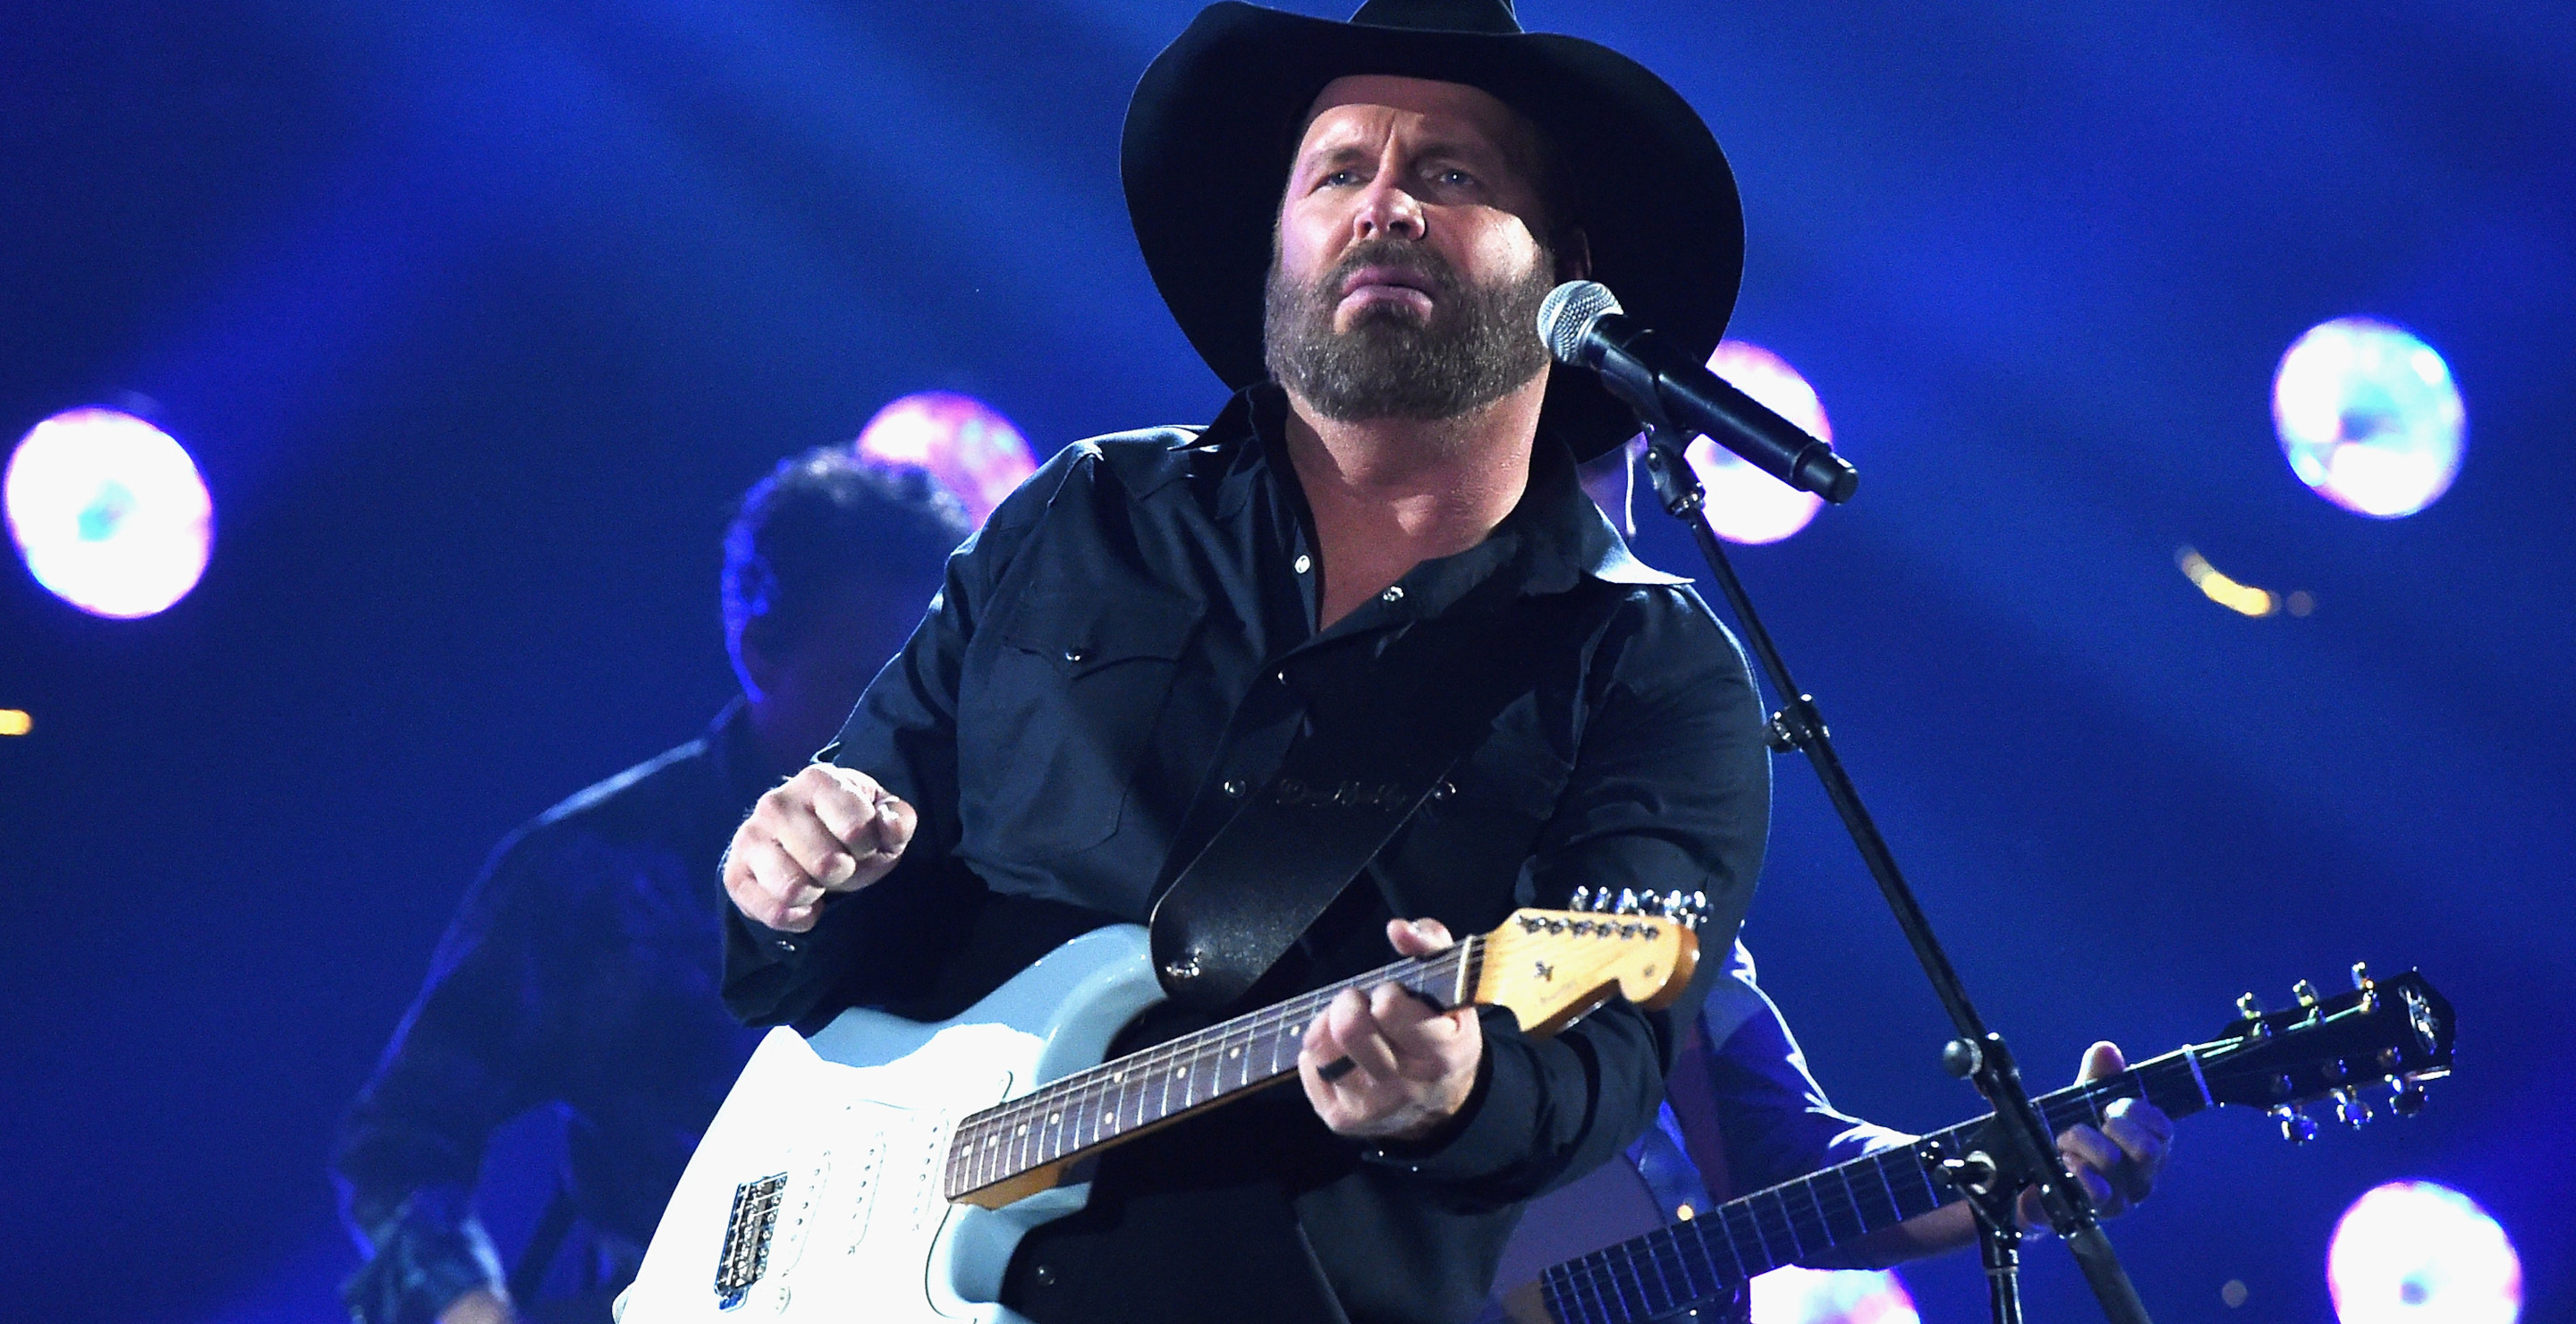 Garth Brooks Accused of Not Playing Country Music at Nashville Bar Friends in Low Places by Reviewers